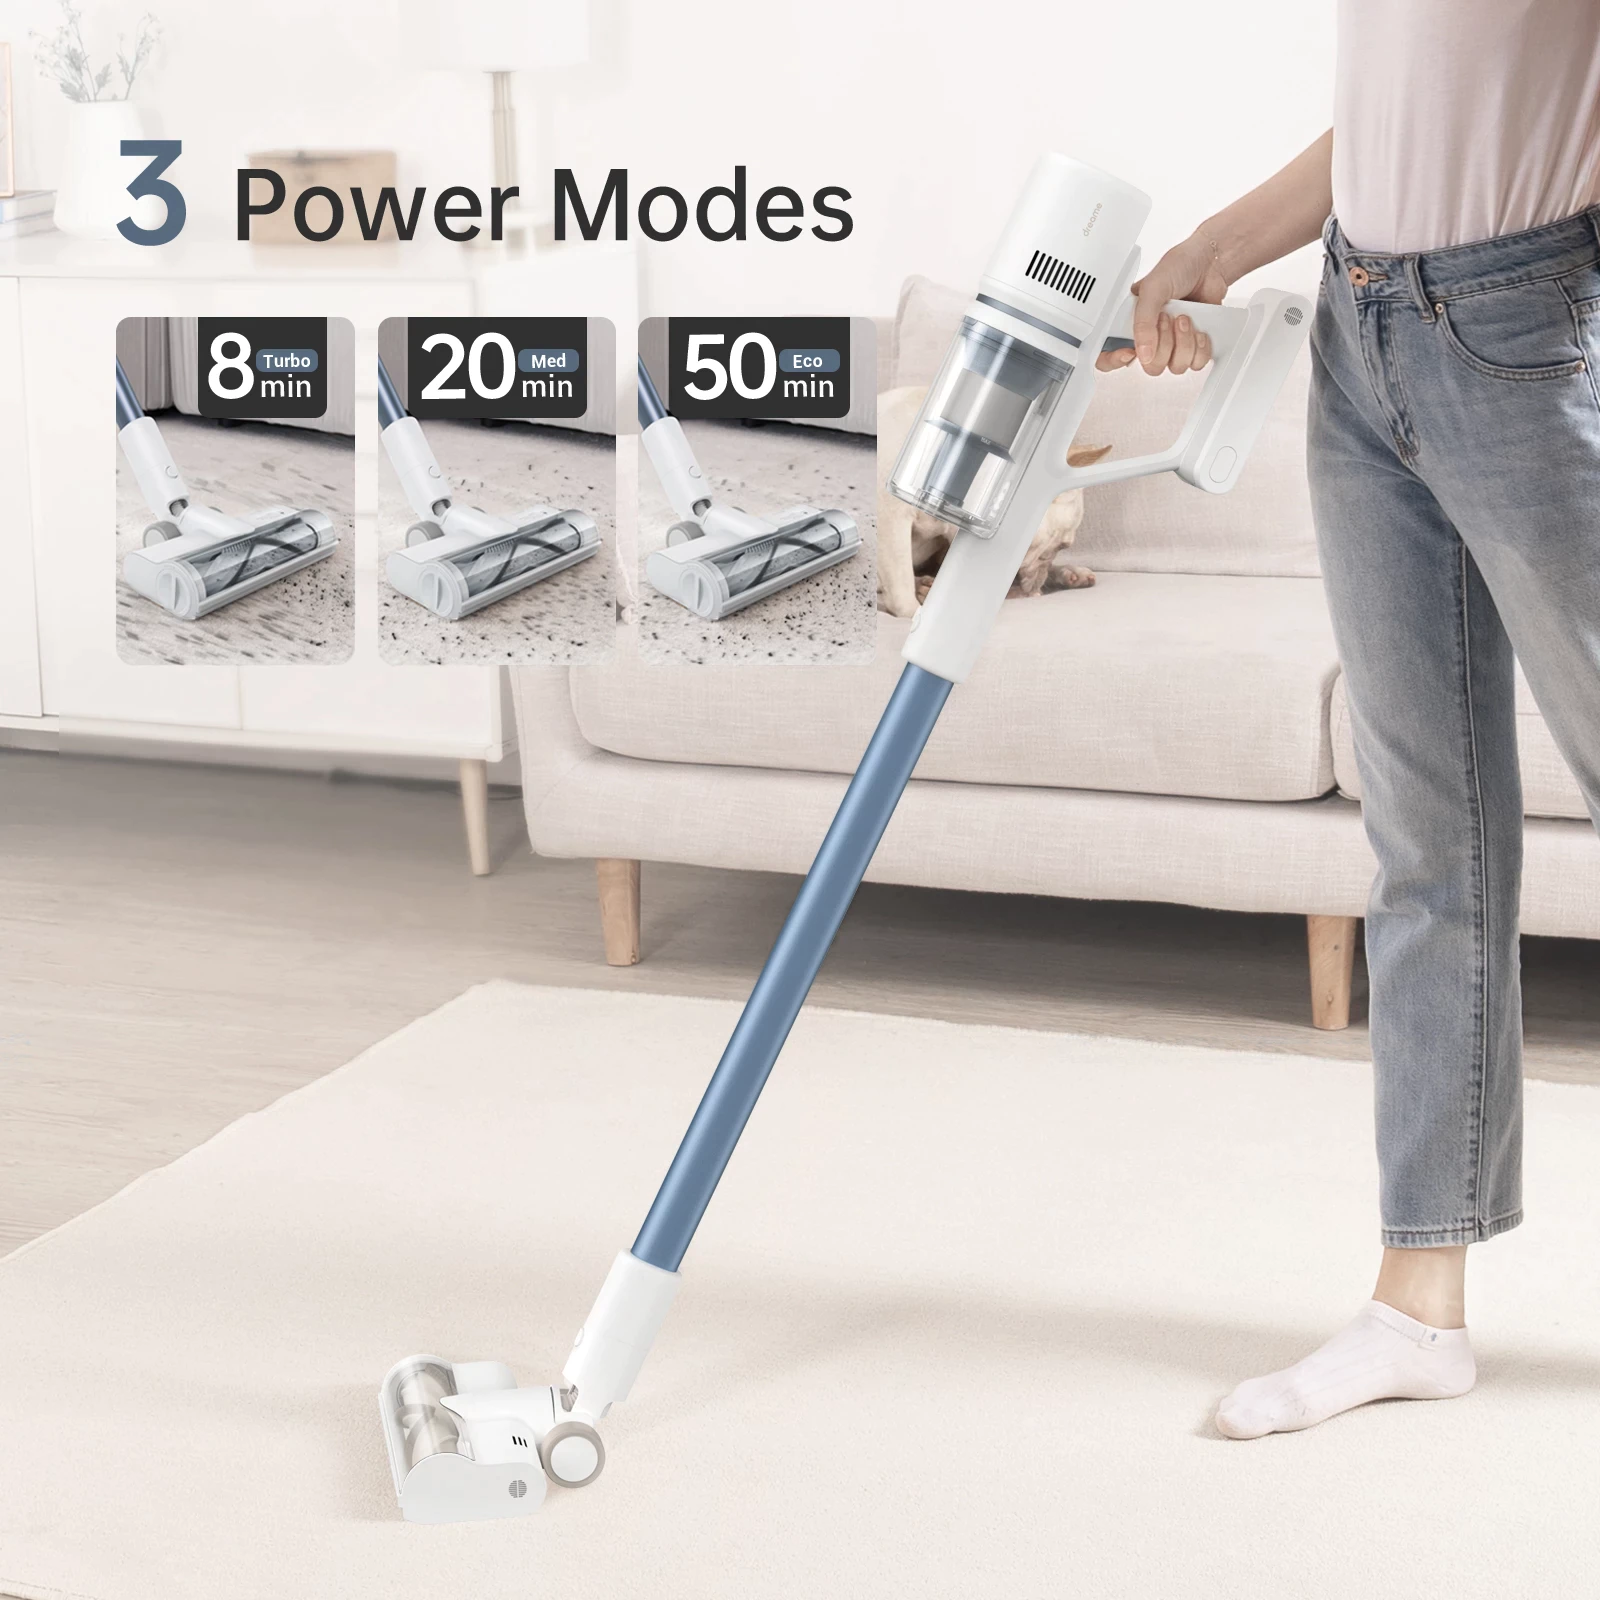 Dreame P10 Handheld Cordless Vacuum Cleaner 20kPa Home Appliances LED Display Dust Collector Floor Carpet Aspiradora For Home